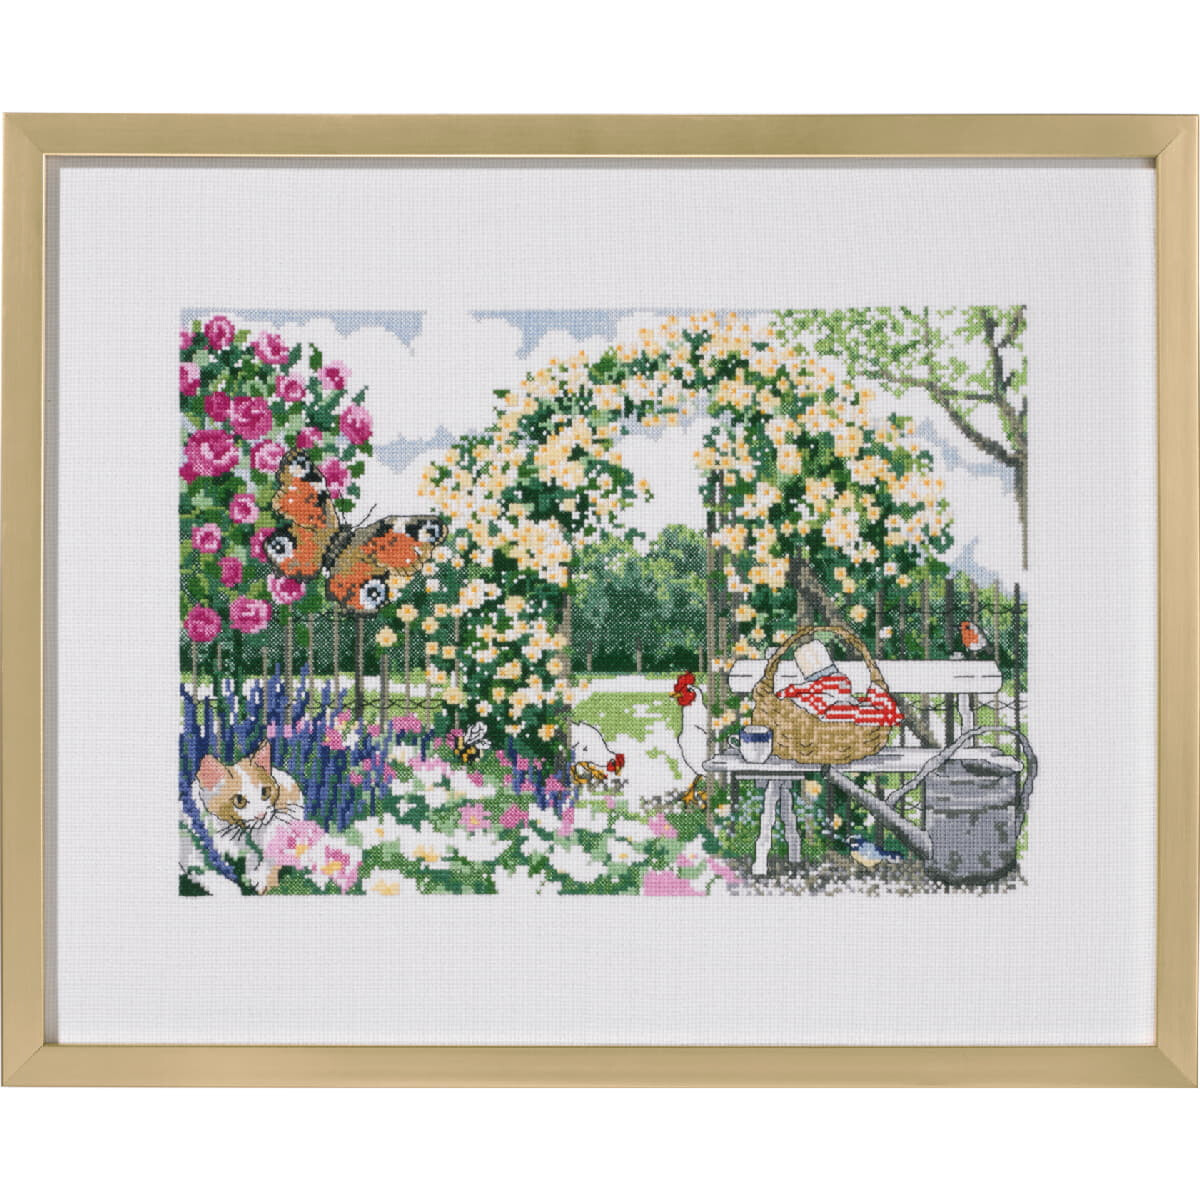 Permin counted cross stitch kit "Garden of...